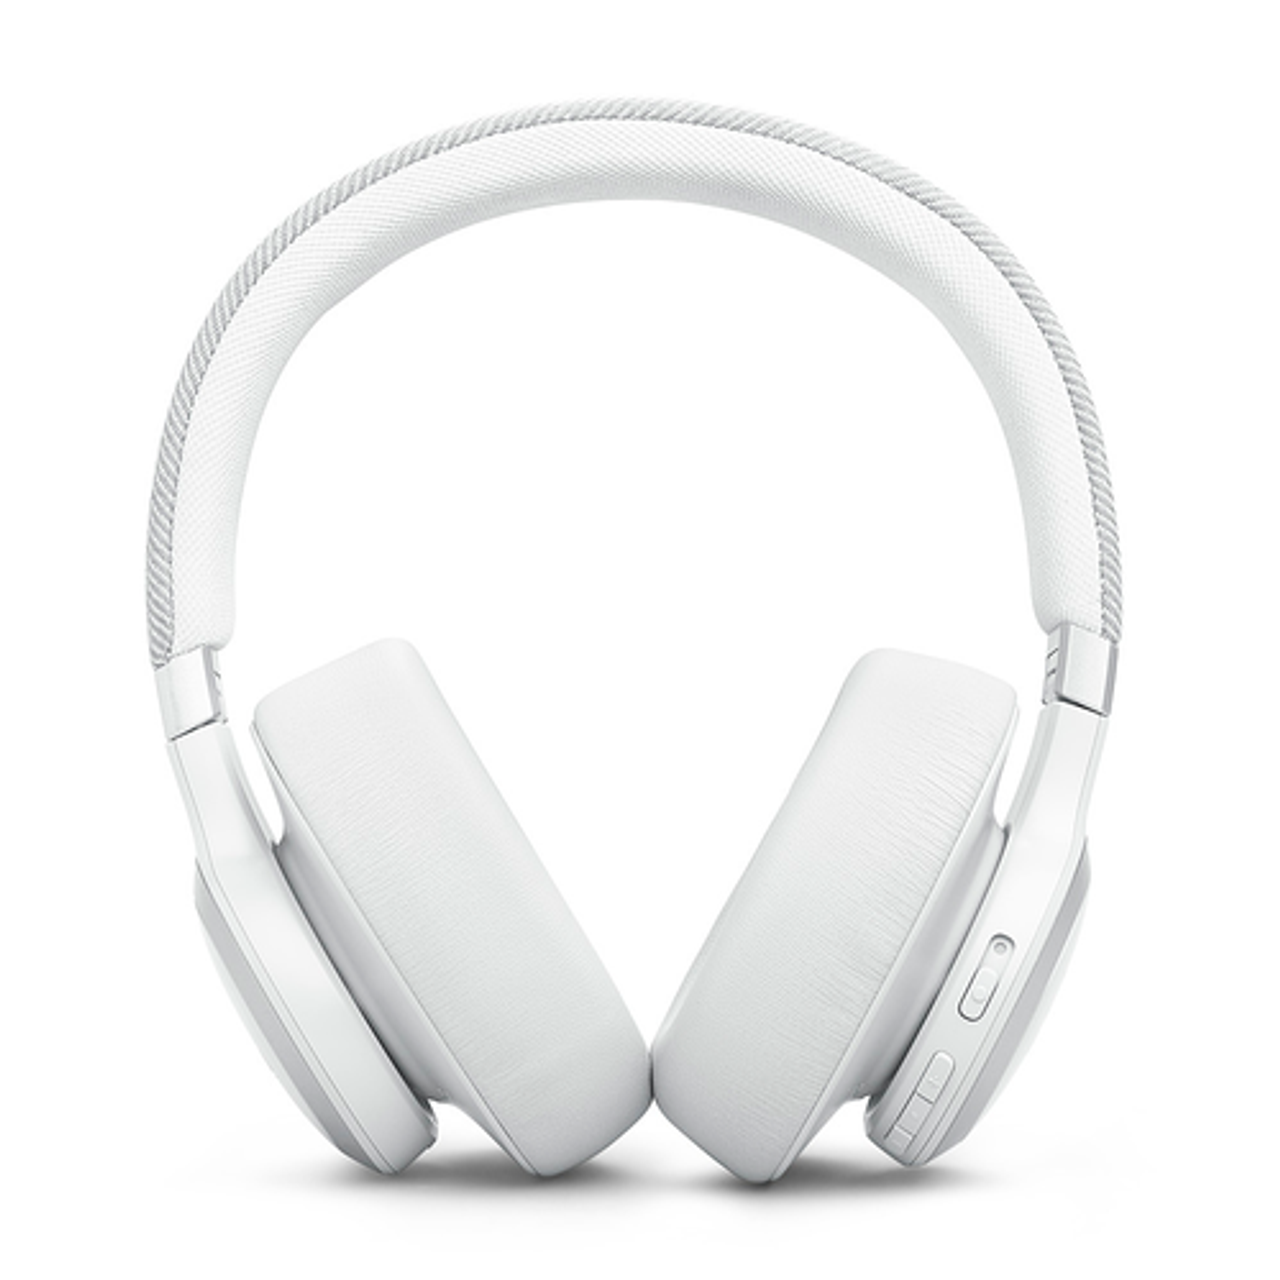 JBL - Wireless Over-Ear Headphones with True Adaptive Noise Cancelling - White